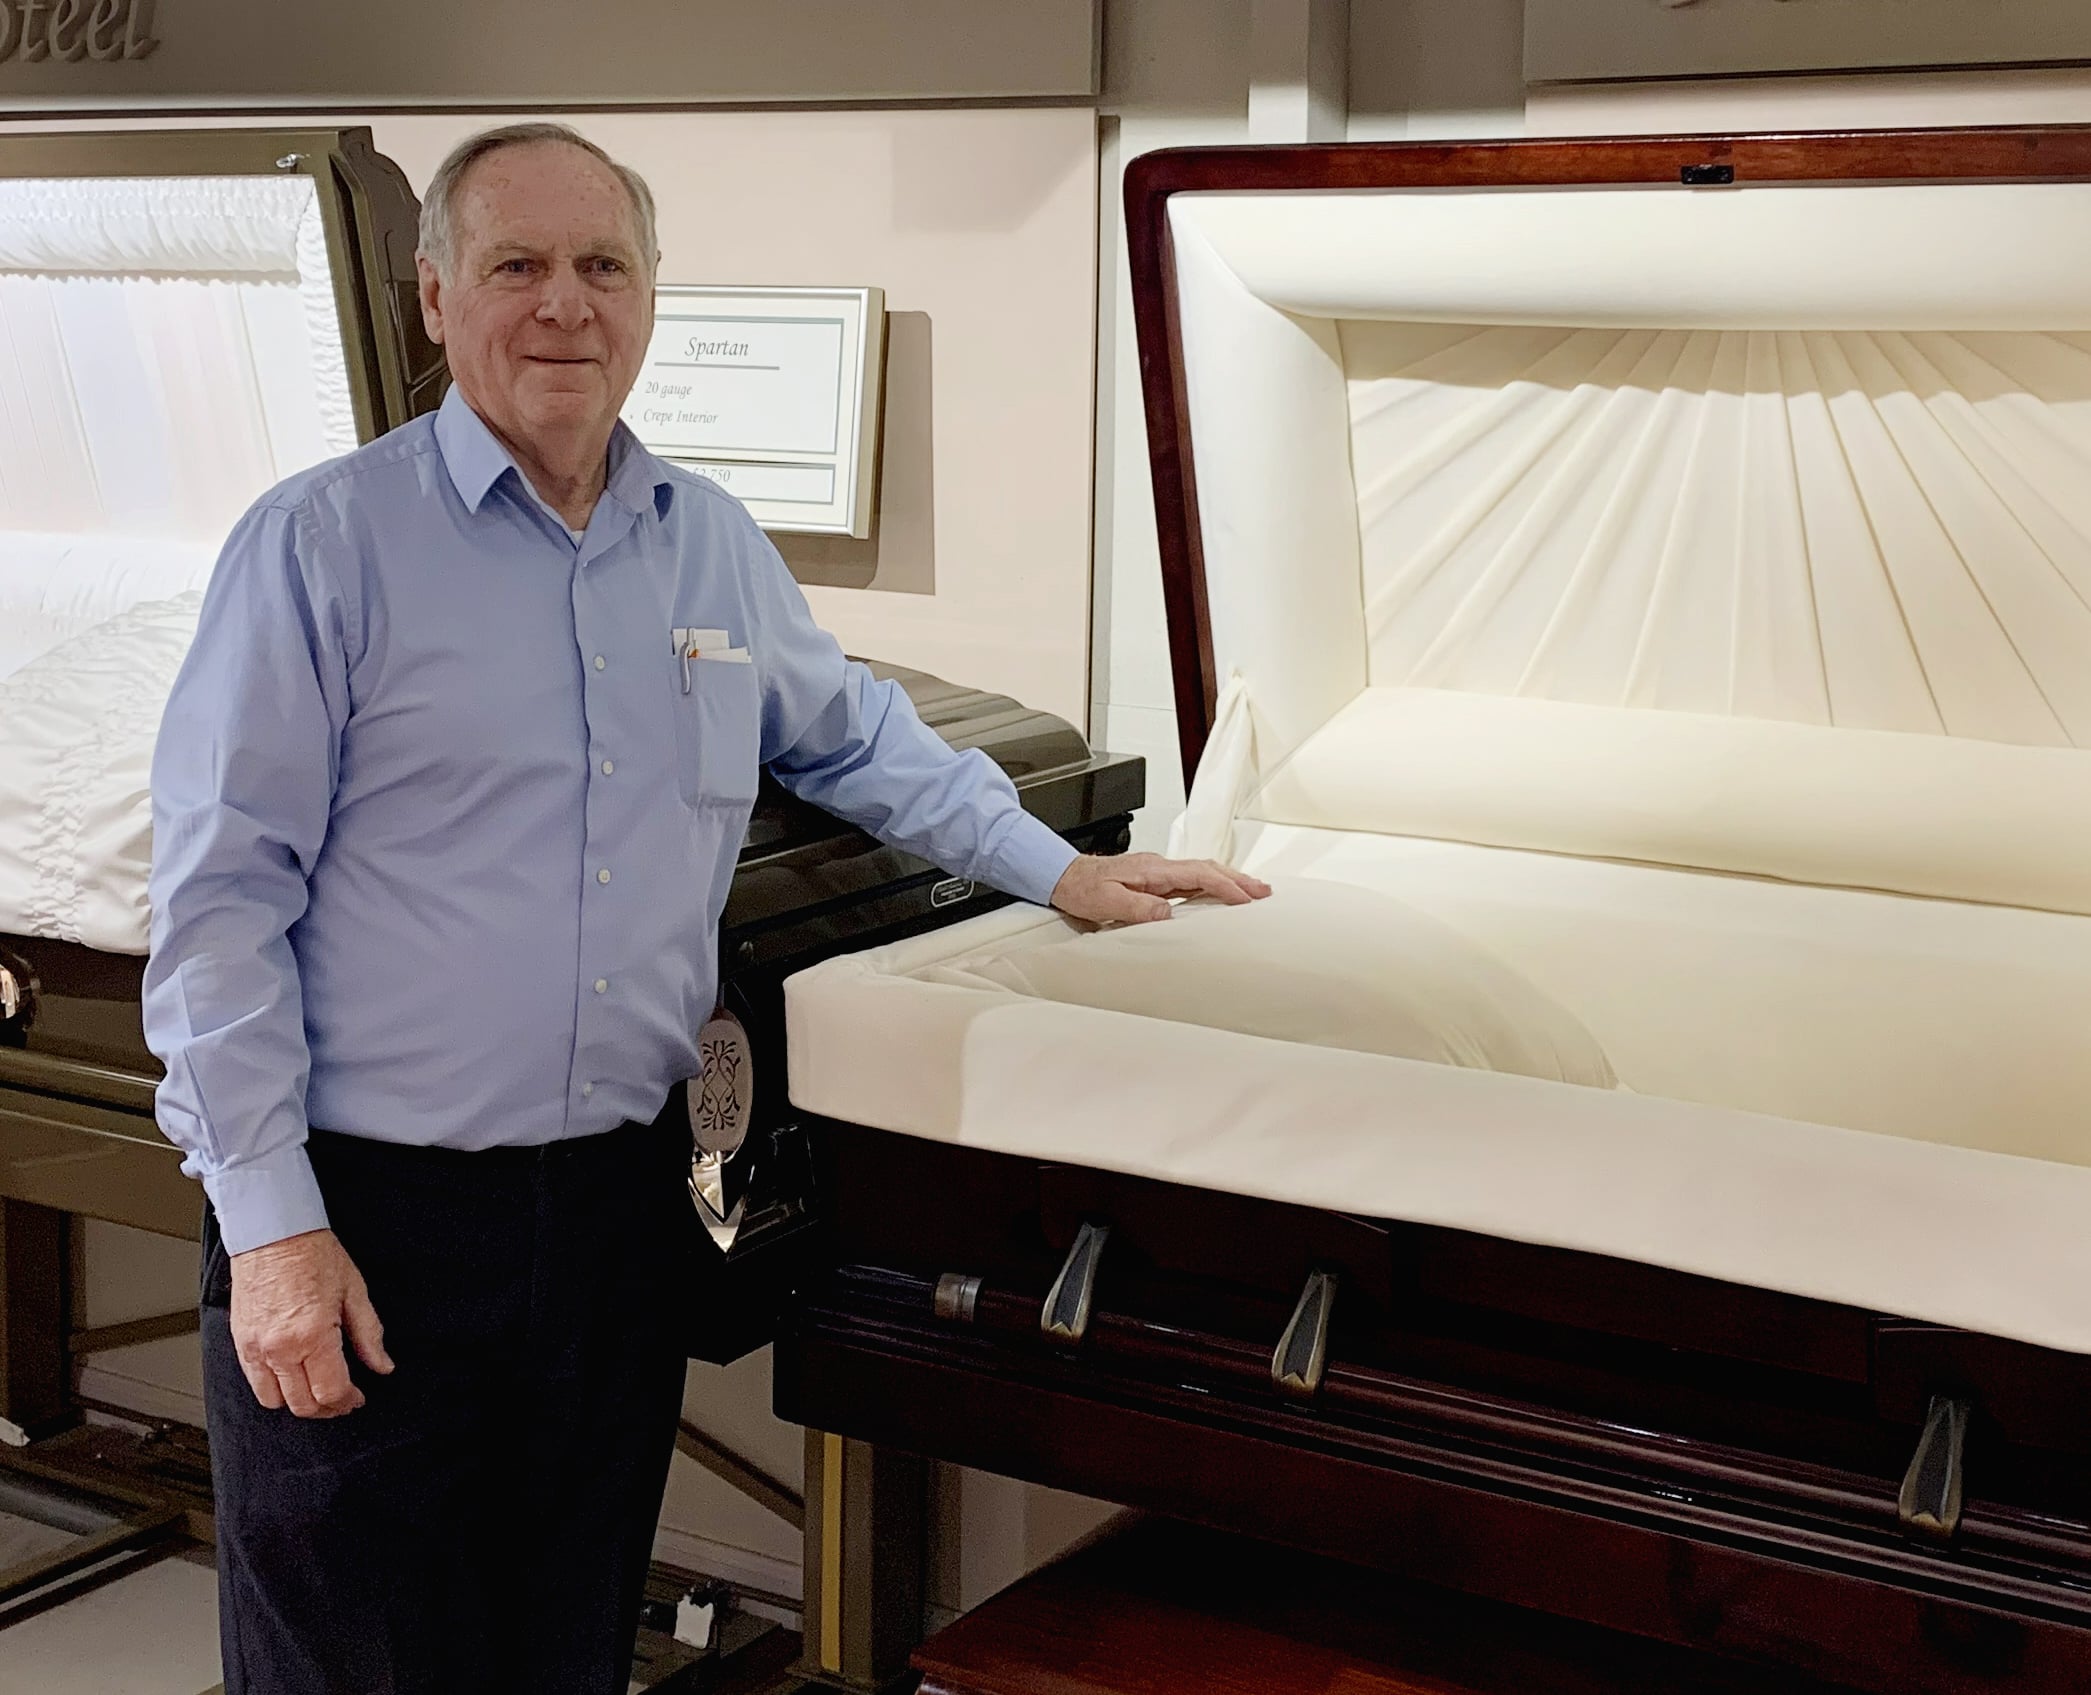 David (Dee) Swick, owner of D.W. Swick Funeral Homes in Southern Ohio, is the January winner of the “Say Yes to Success” Free Casket Giveaway by Private Label.